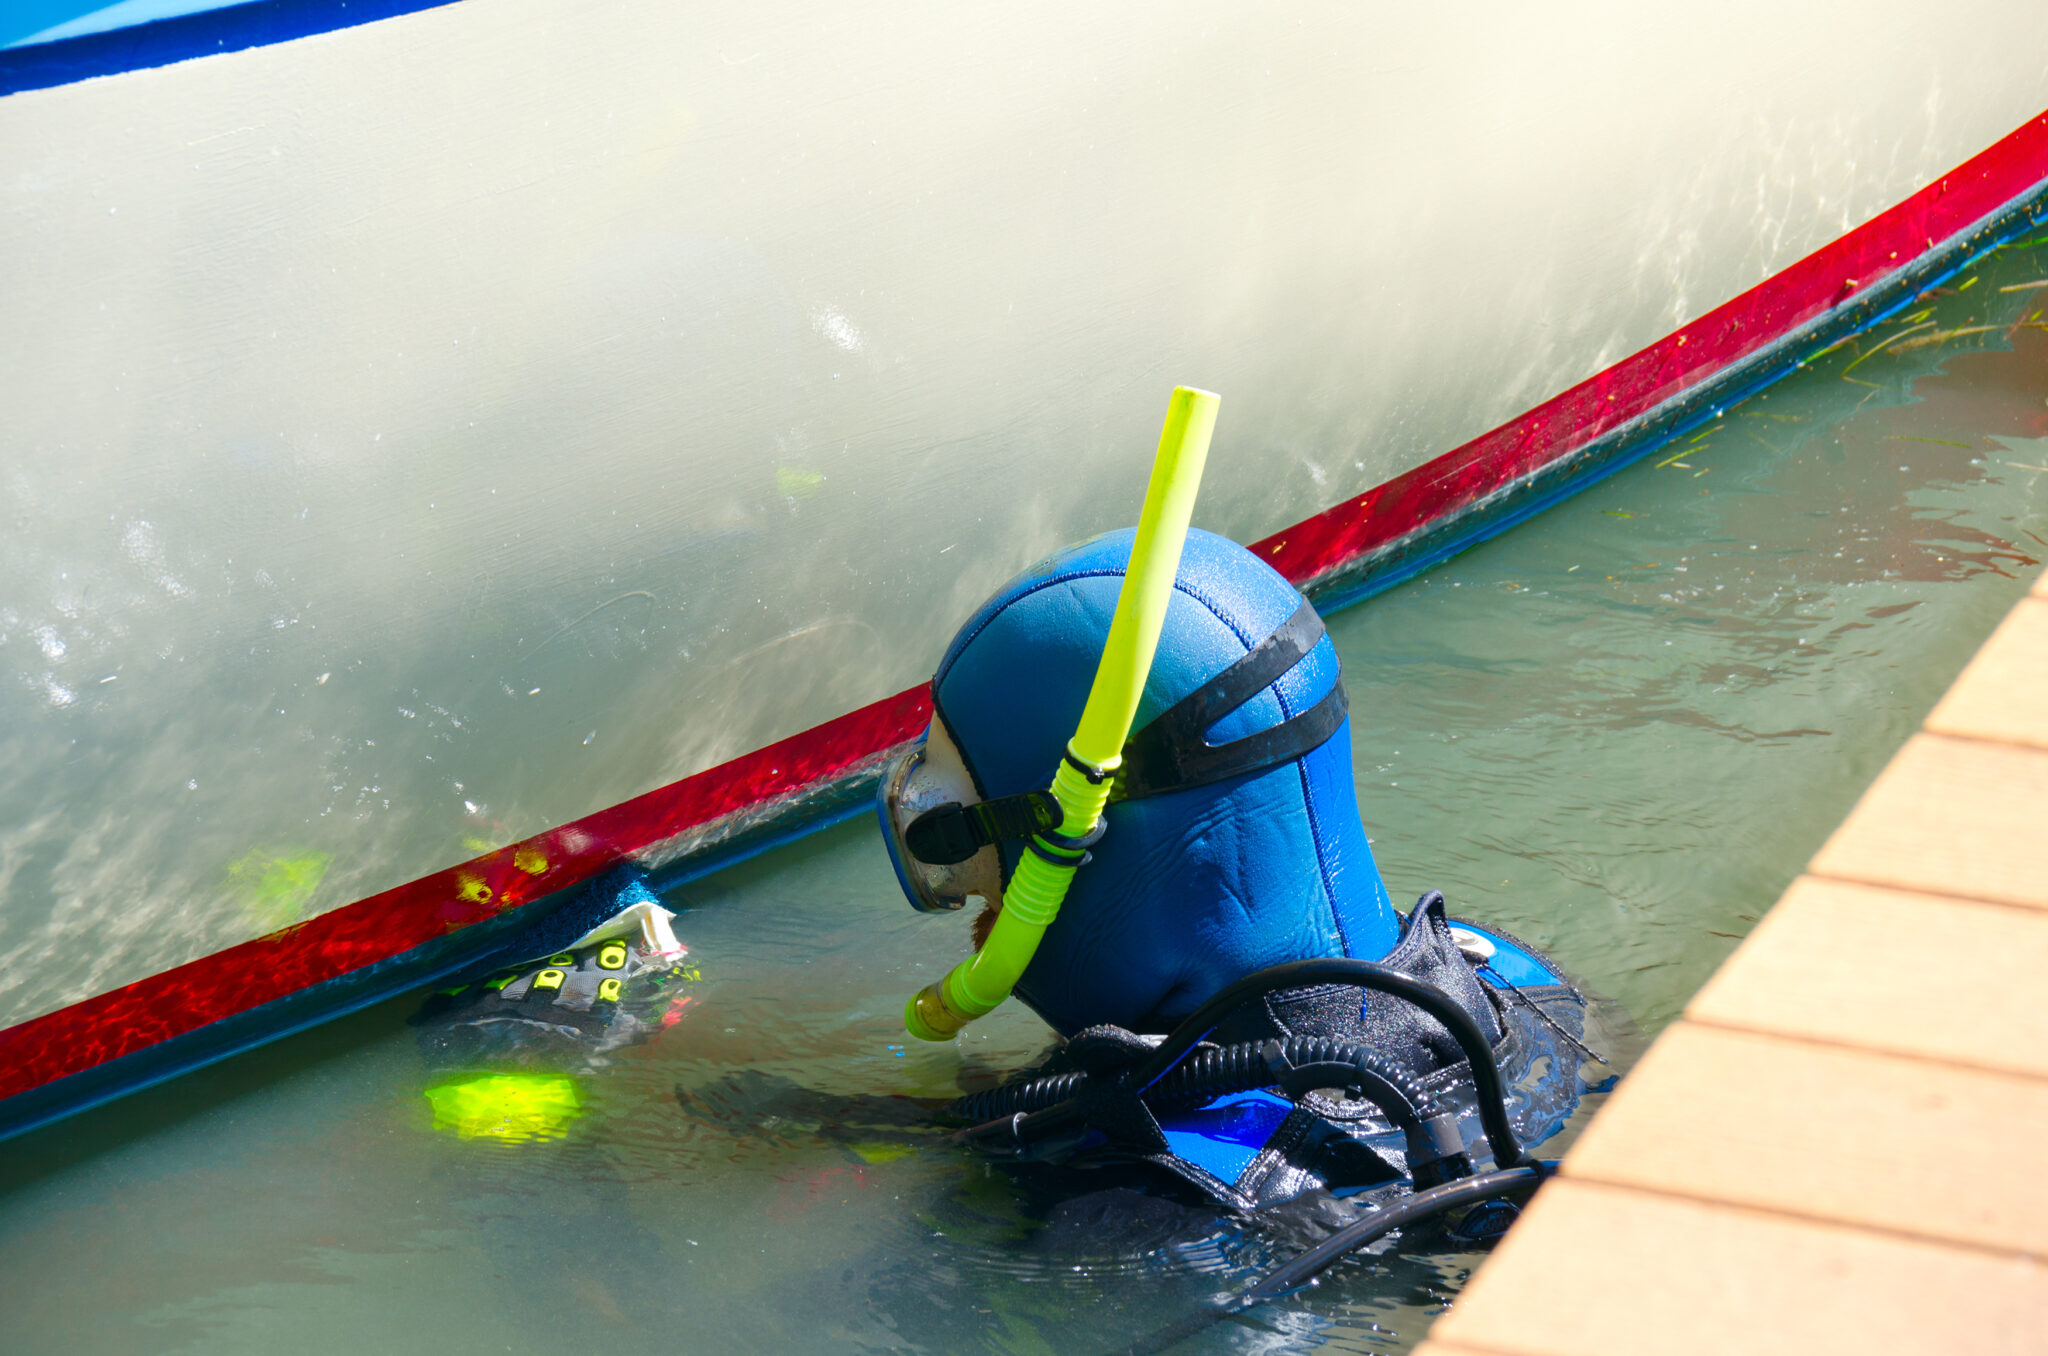 A diver cleans the hull of a boat with a brush